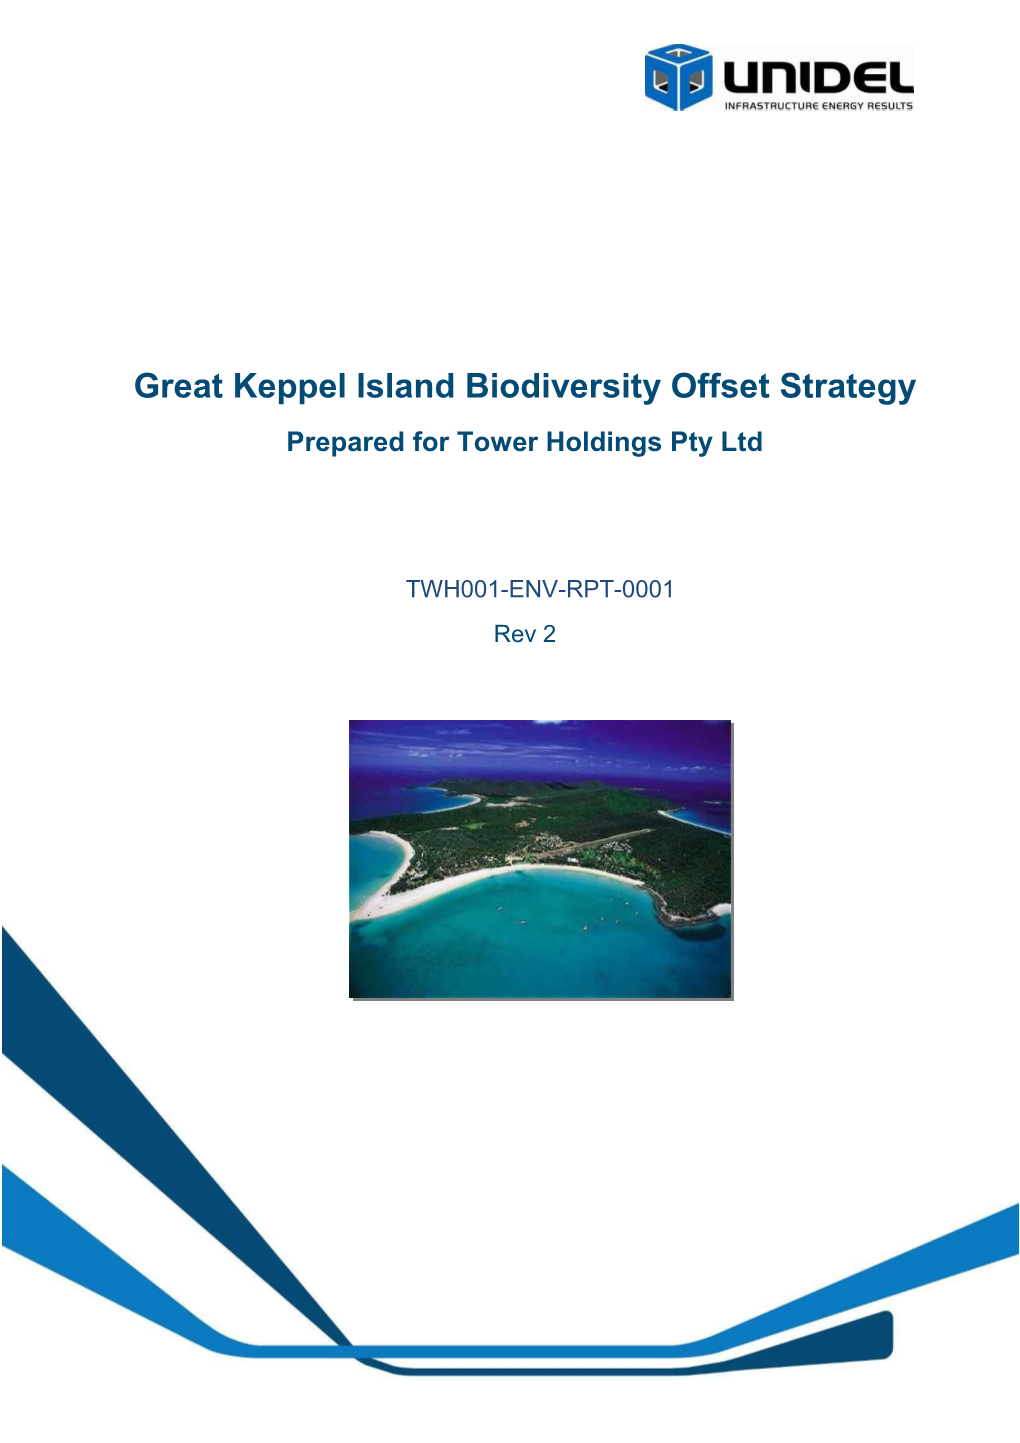 Great Keppel Island Biodiversity Offset Strategy Prepared for Tower Holdings Pty Ltd